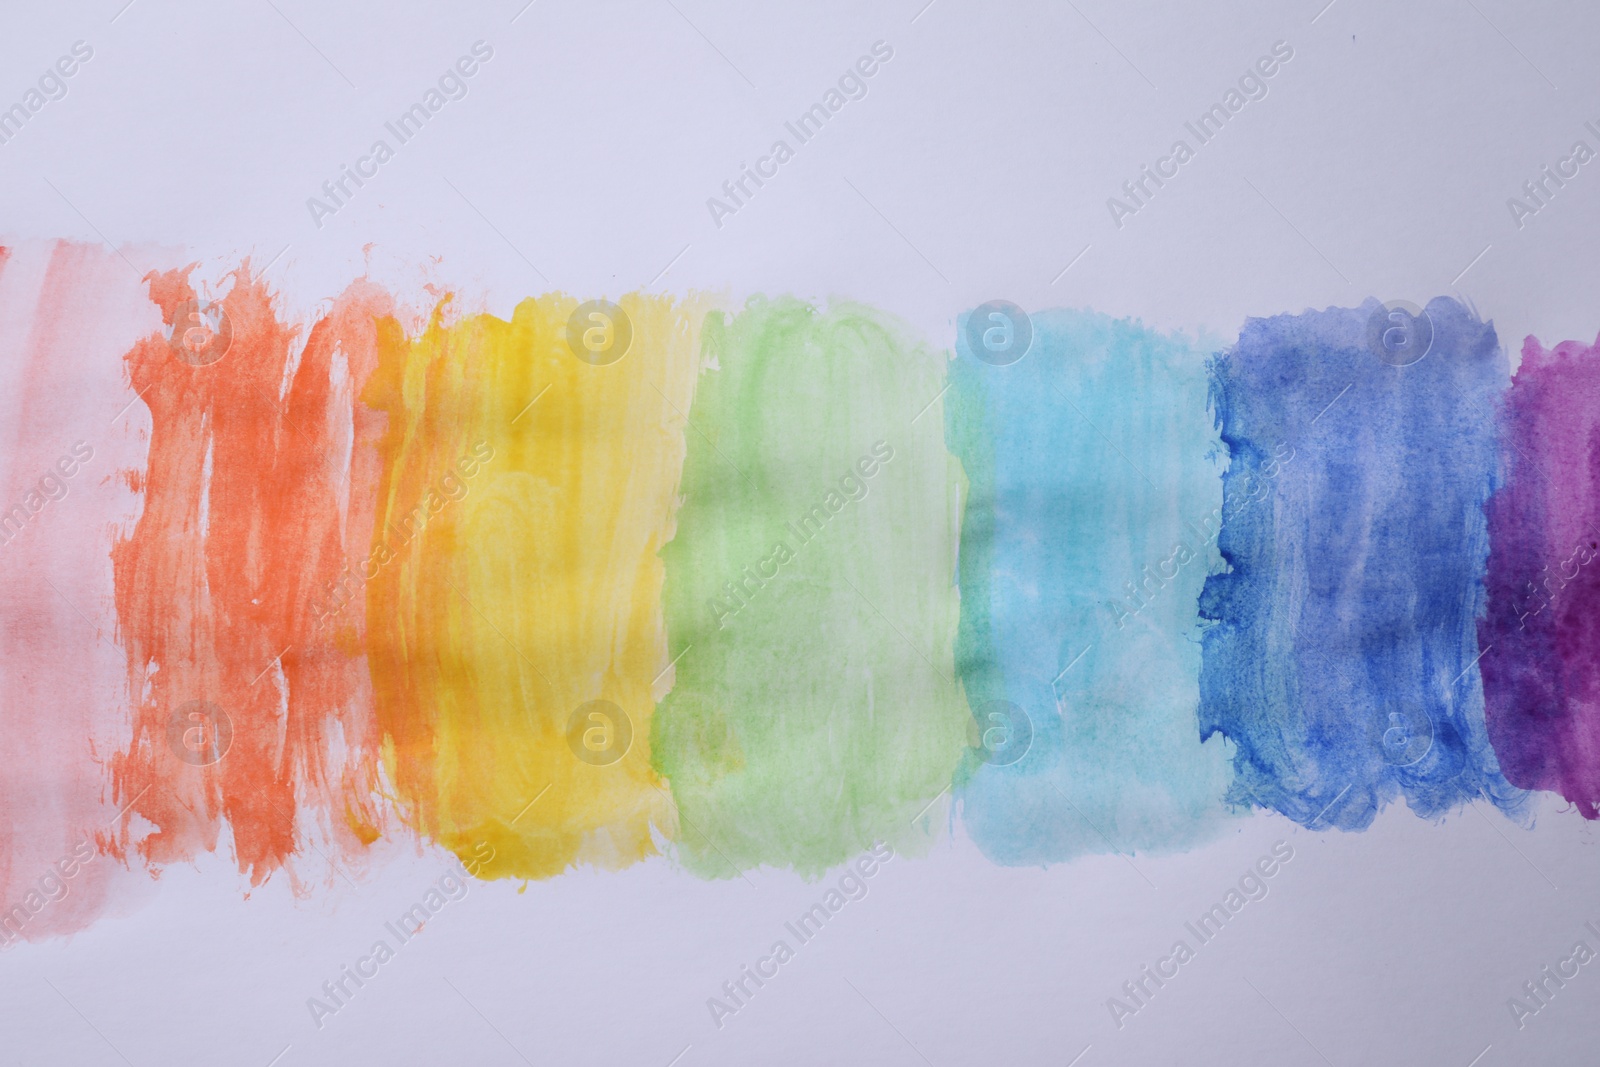 Photo of Rainbow drawing with watercolor paint on white paper, top view